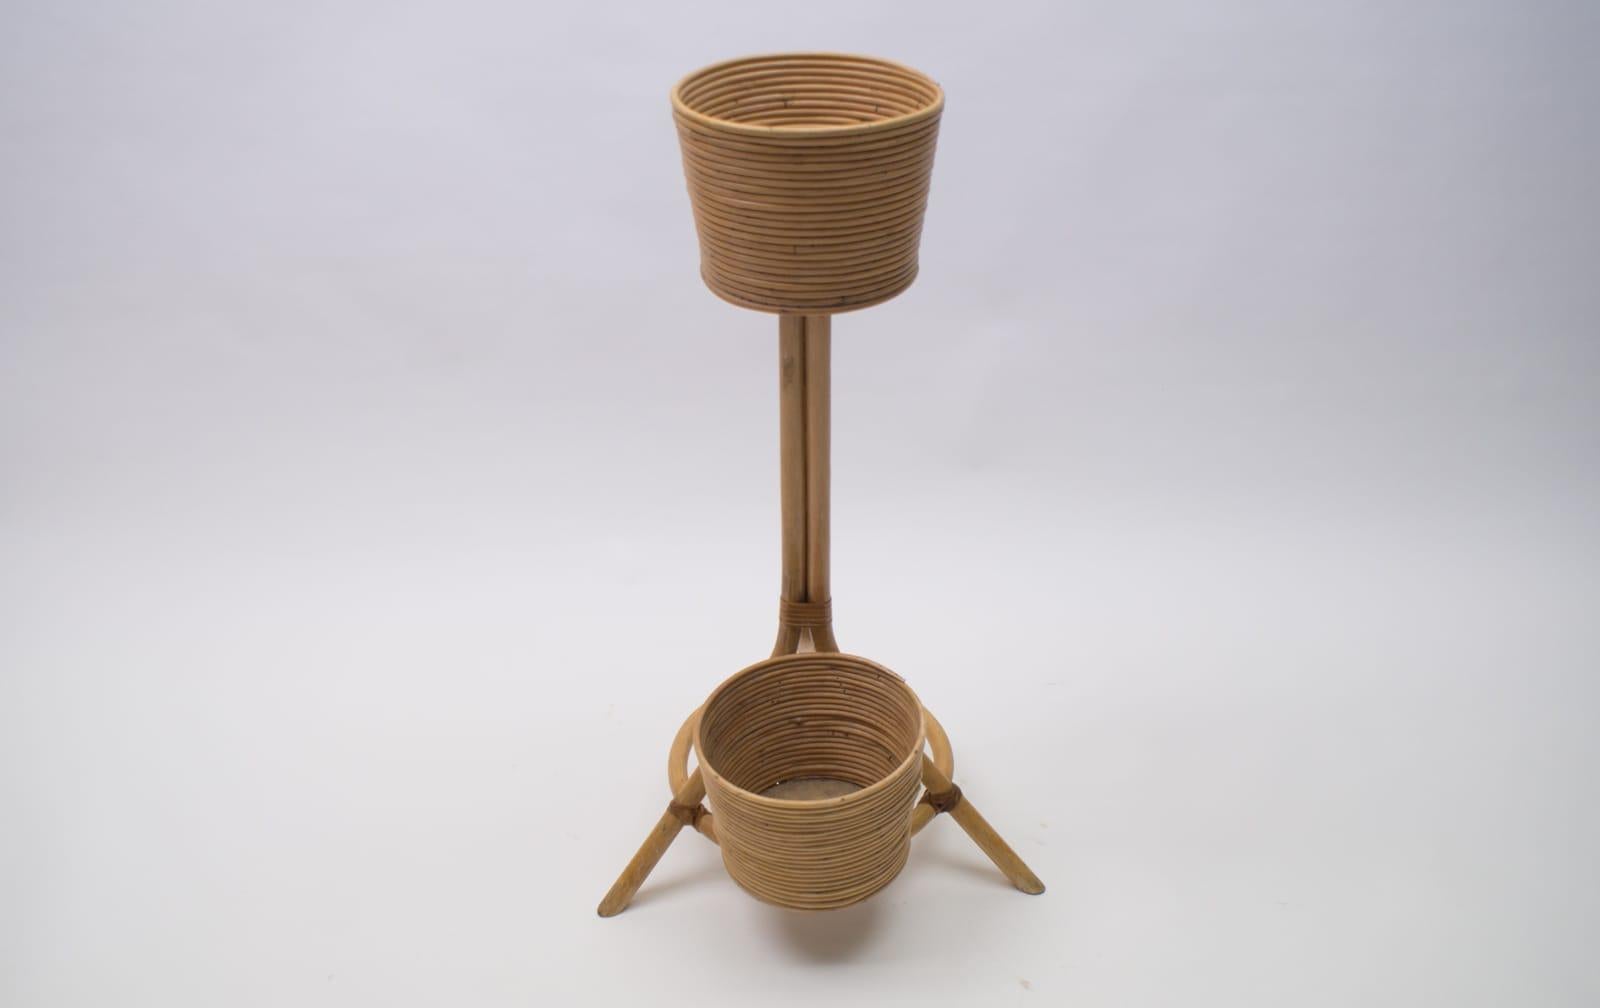 Mid-20th Century Italian Bamboo and Rattan Flower Stand or Plant Holder, 1950s For Sale